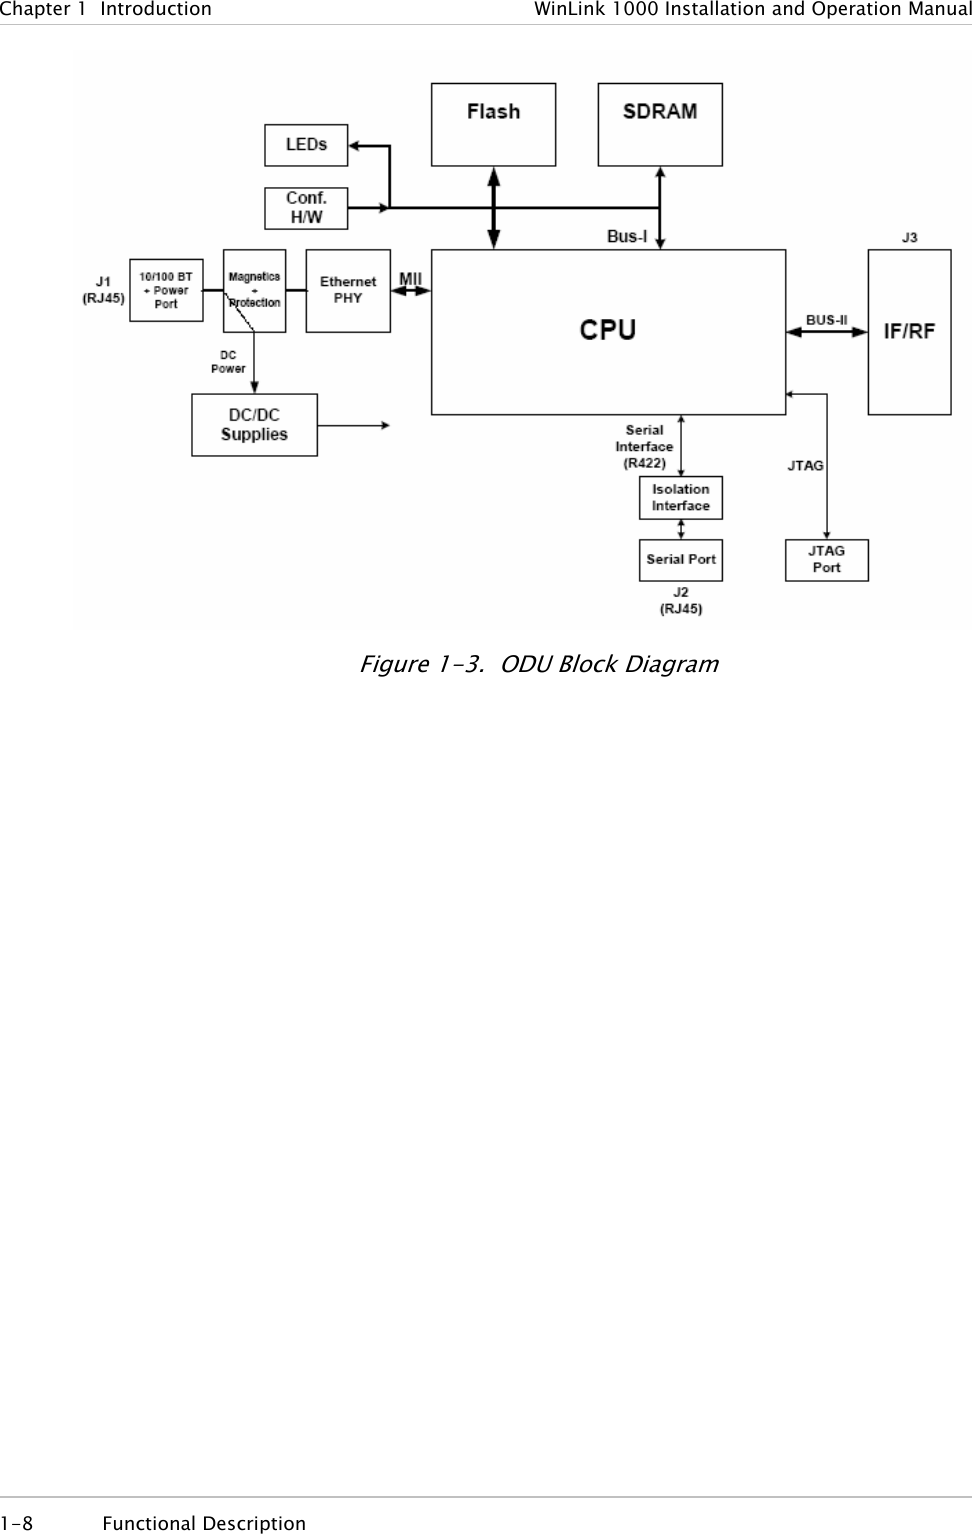 Chapter 1  Introduction  WinLink 1000 Installation and Operation Manual  Figure  1-3.  ODU Block Diagram 1-8 Functional Description  